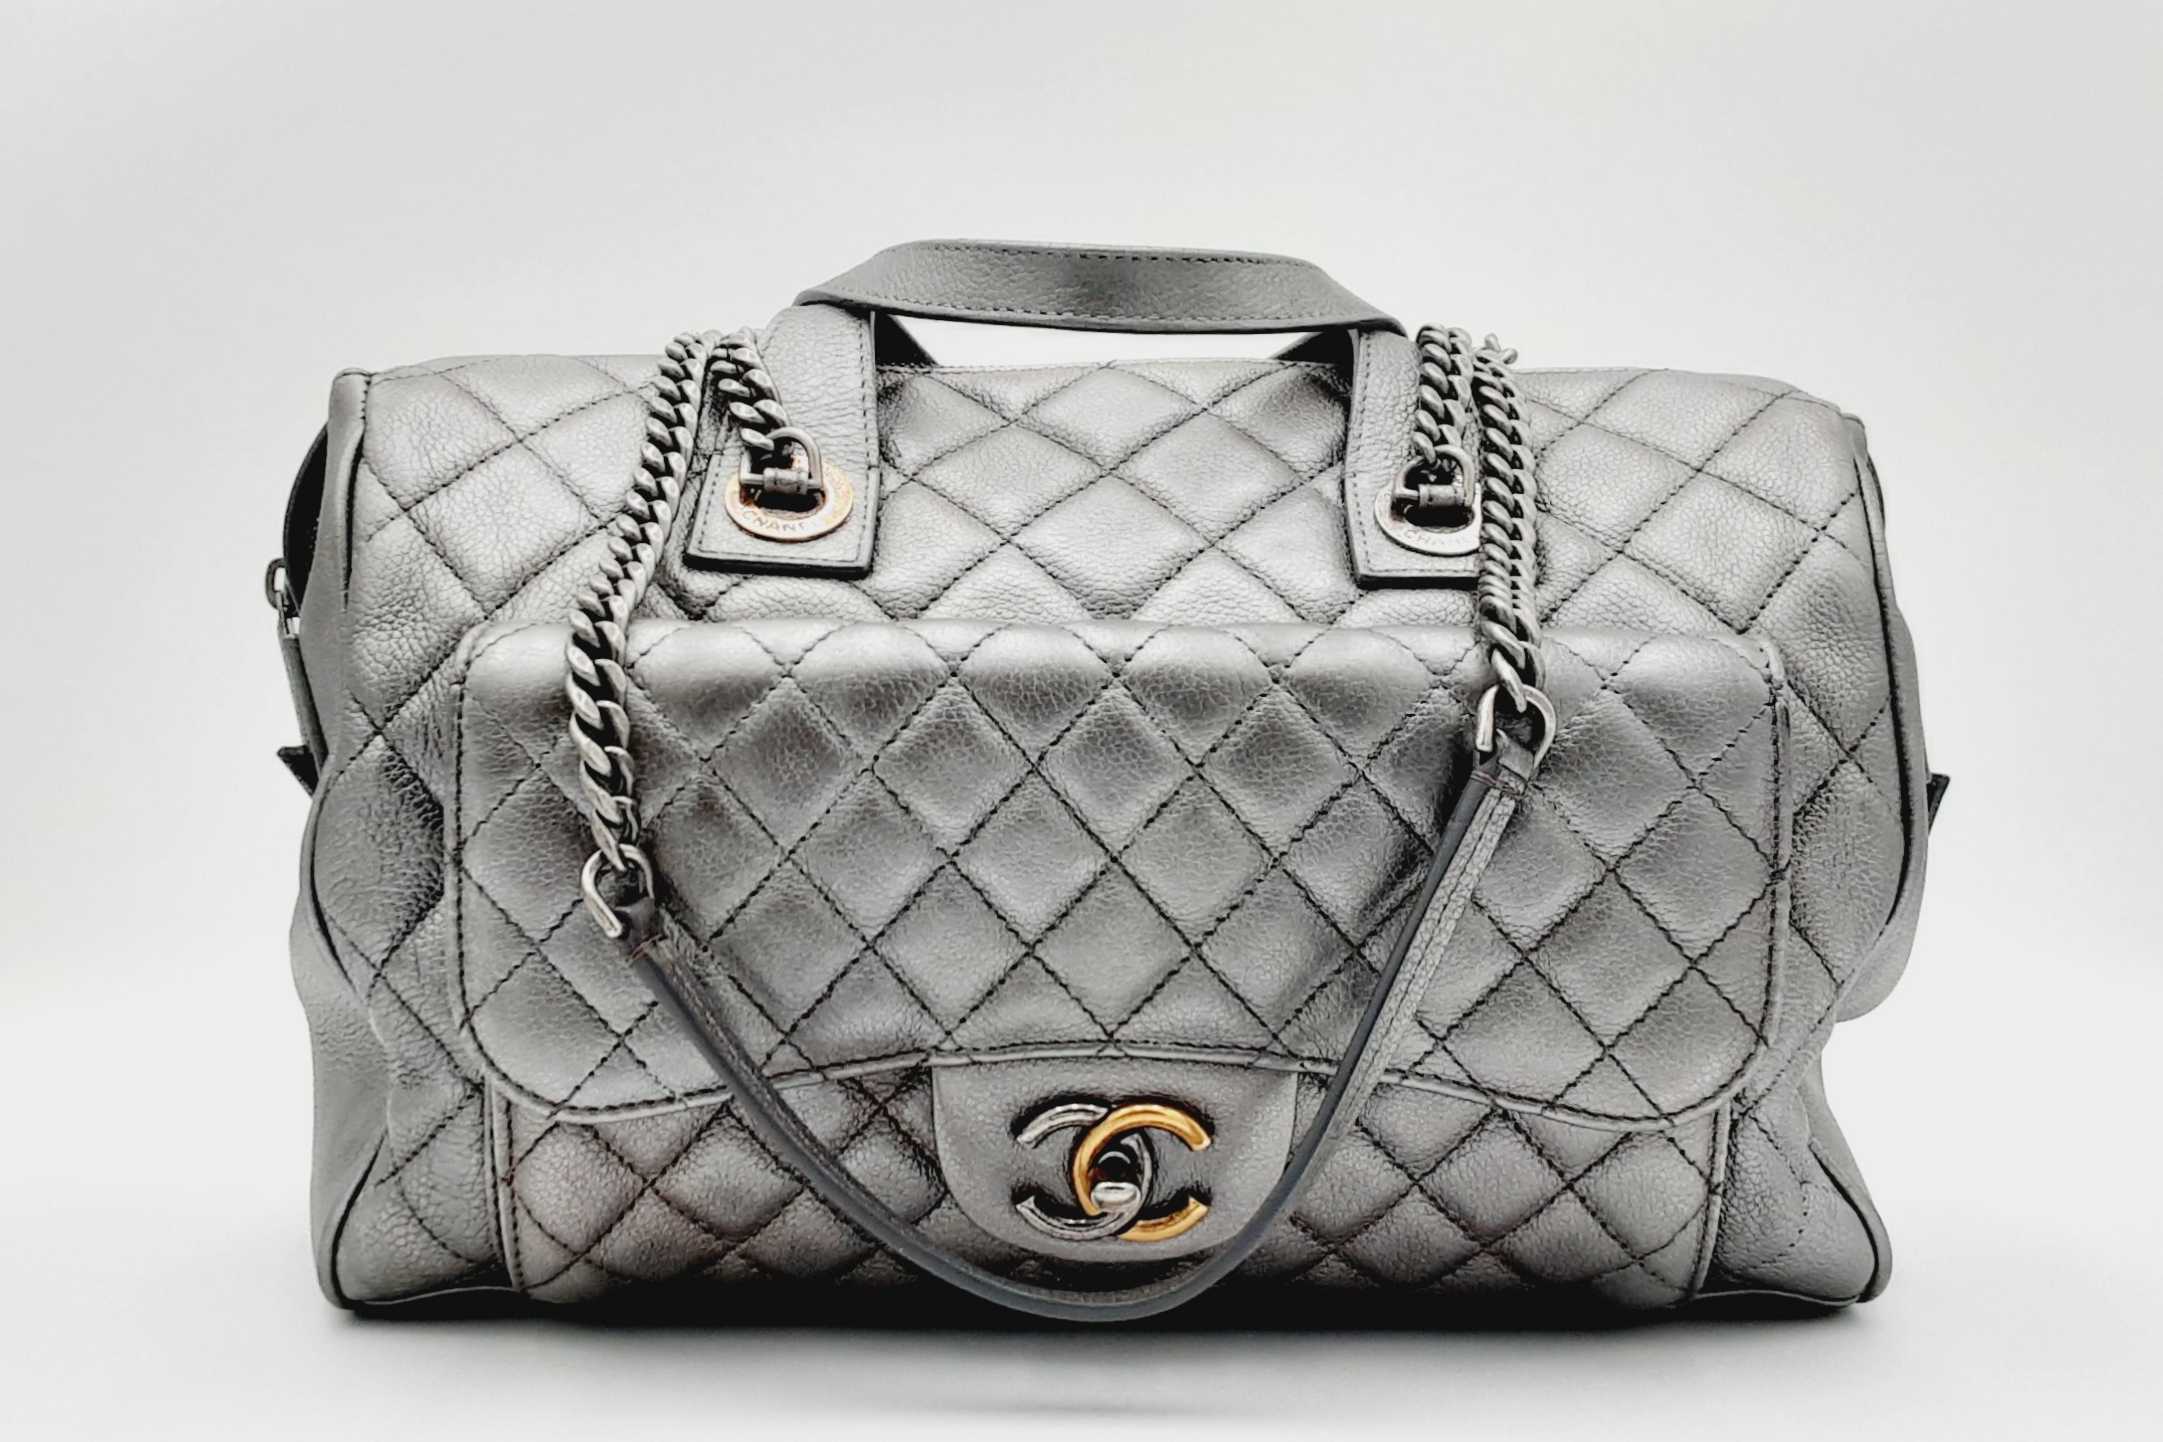 Chanel - Authenticated Bowling Bag Handbag - Leather Blue Plain for Women, Never Worn